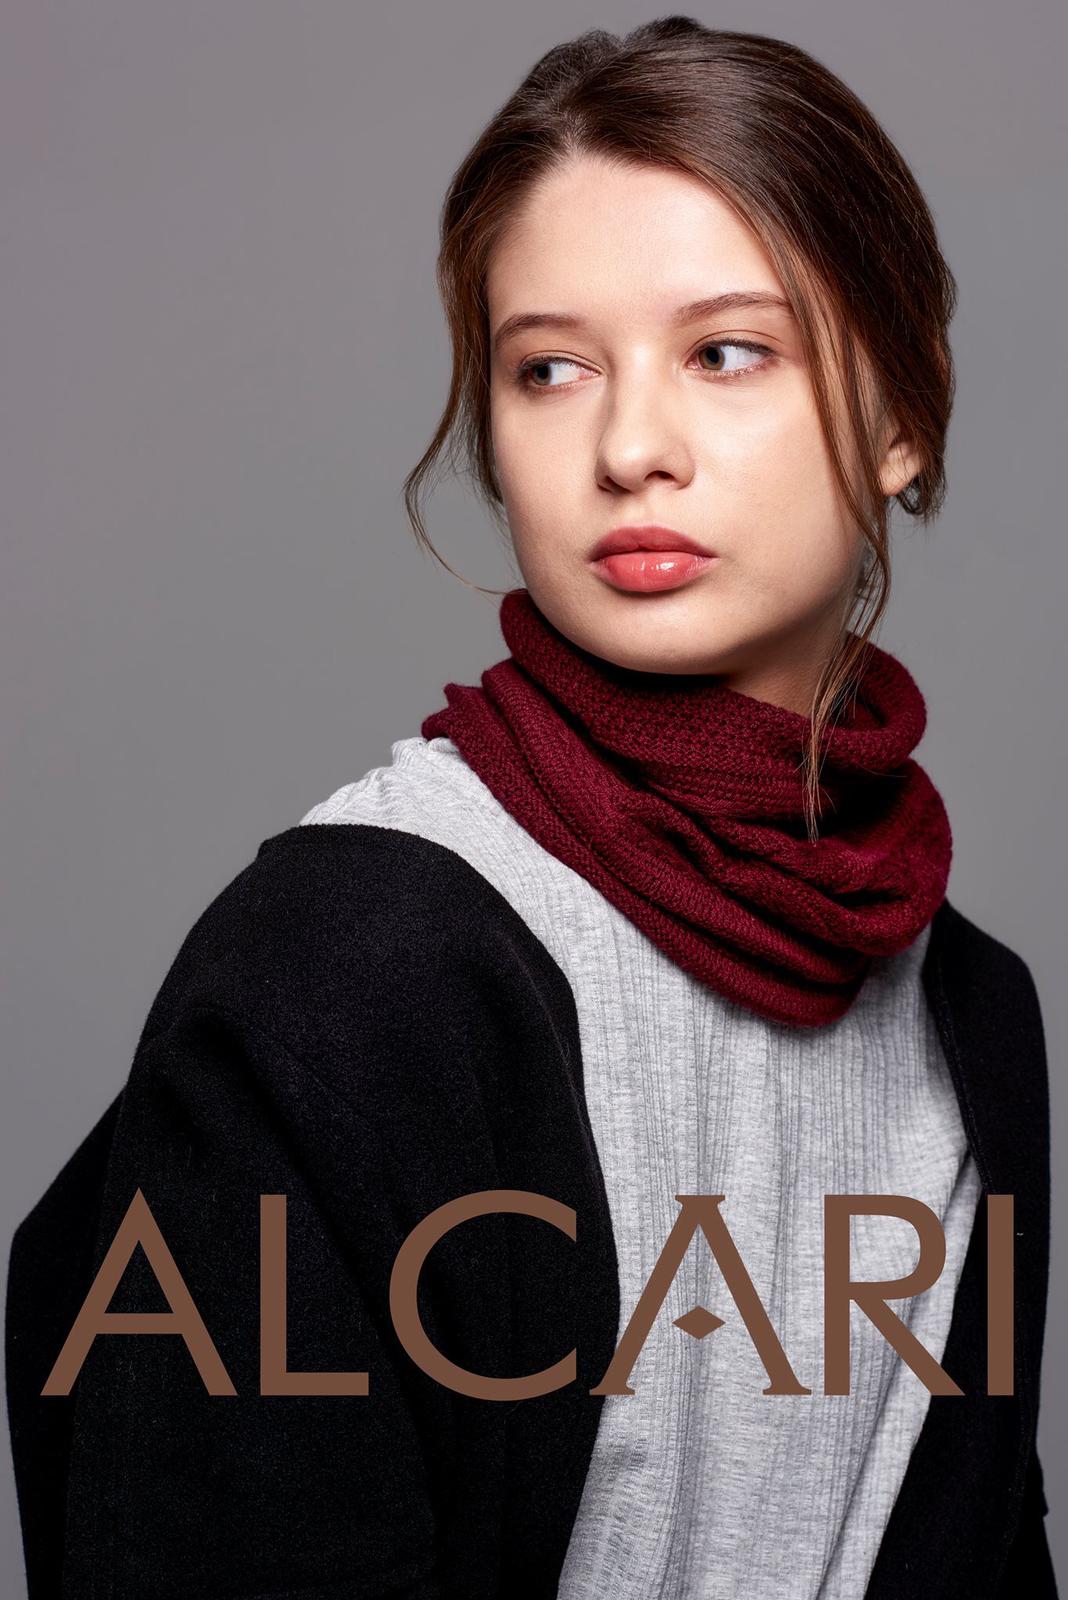 Laurie C.化妝師工作紀錄: Commercial makeup for brand Alcari